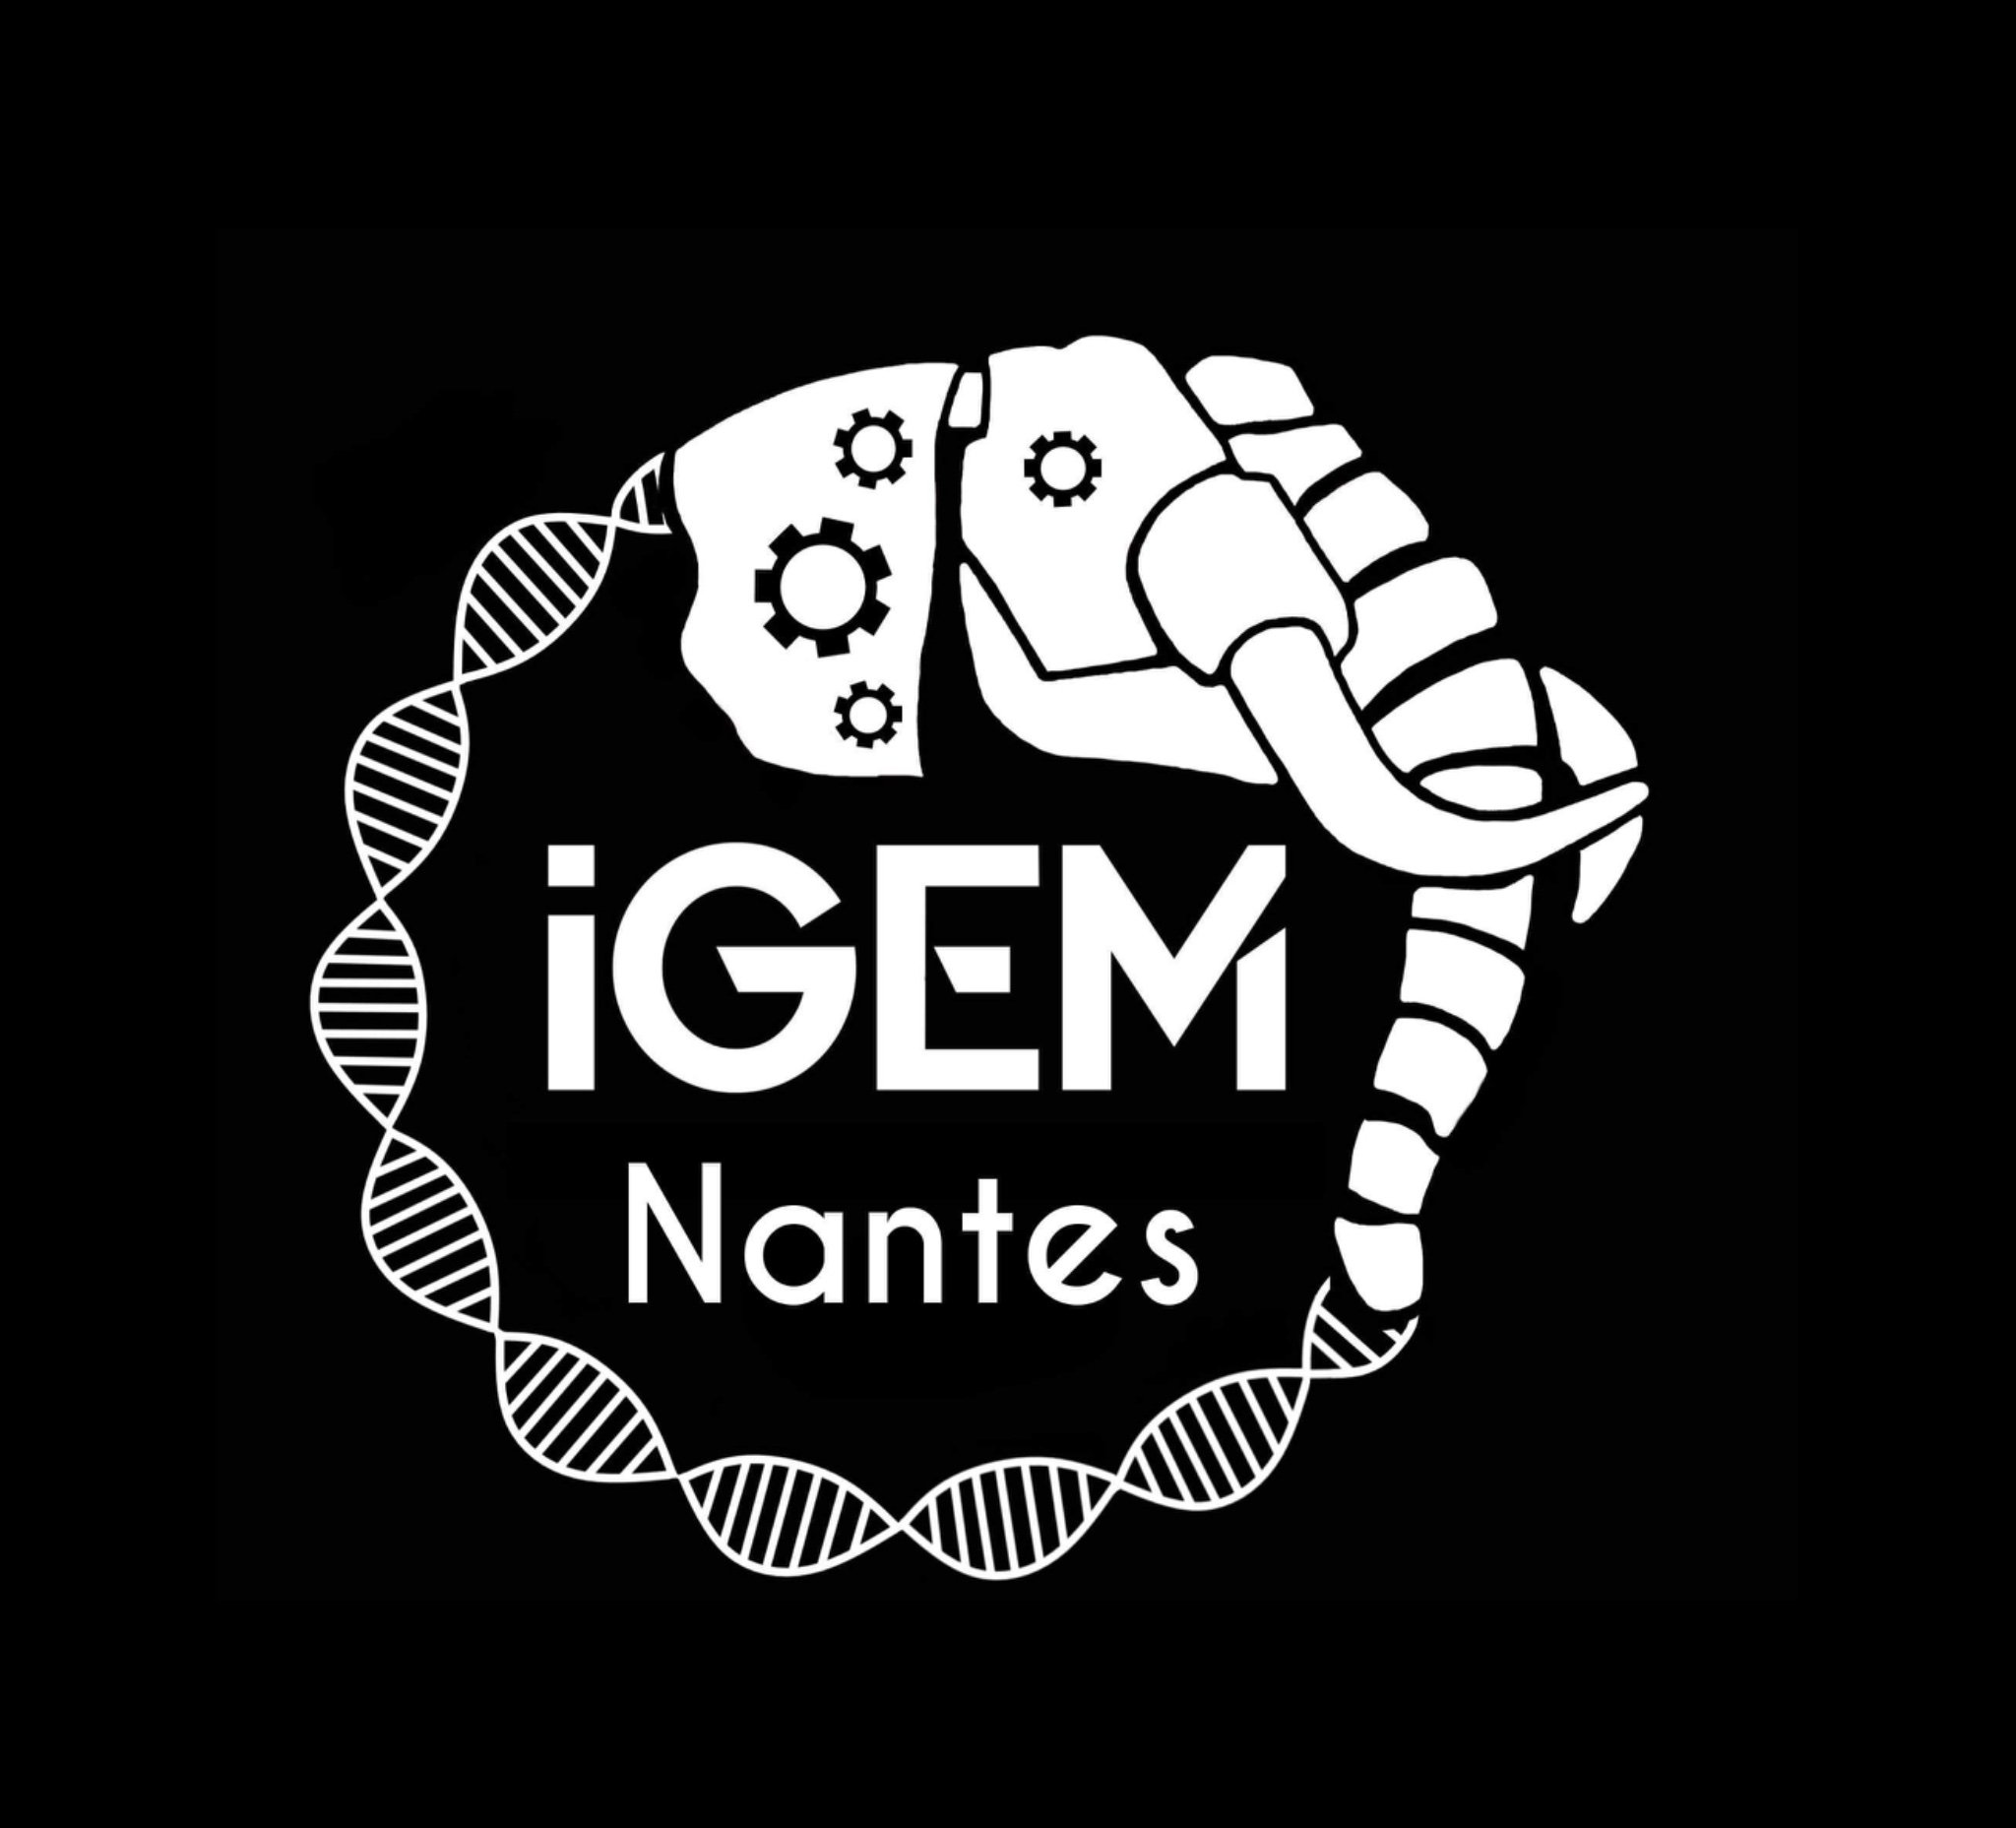 Join us on the iGEM adventure! we are from Nantes, France 🇫🇷👩‍🔬👨‍🔬⚙️